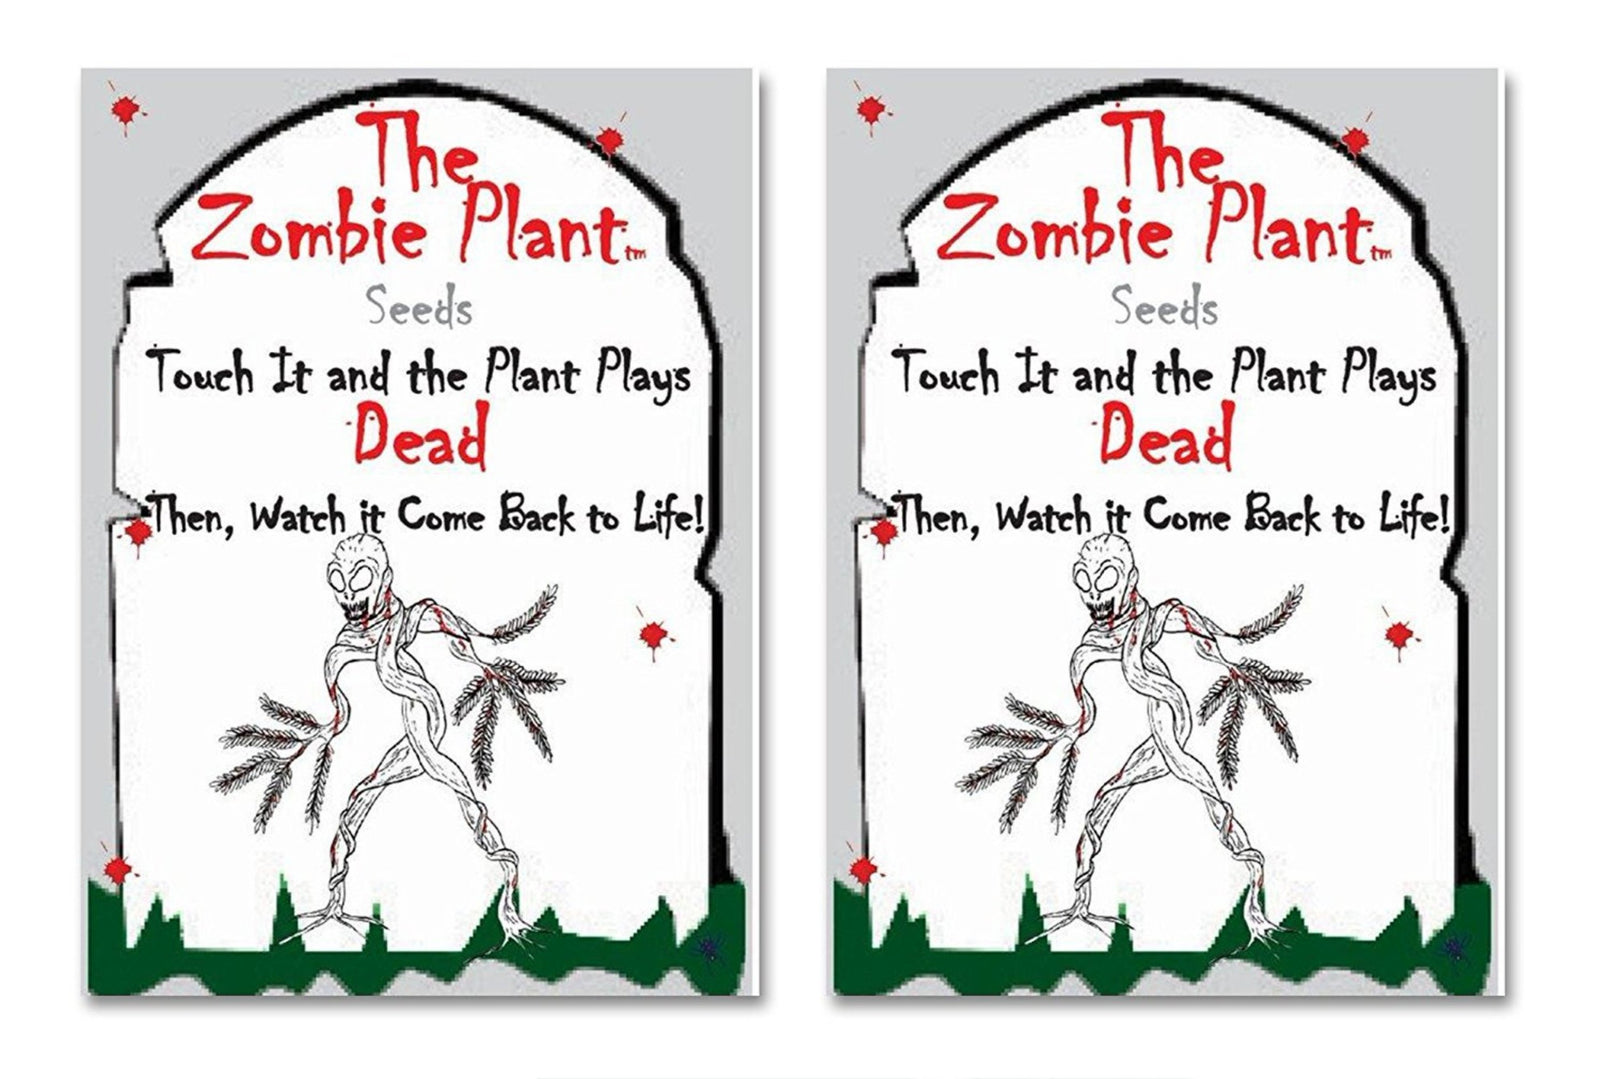 Zombie Plant Seed Packets (2) Grow your own Zombie Plant at home and watch it "Play DEAD" when Touched!